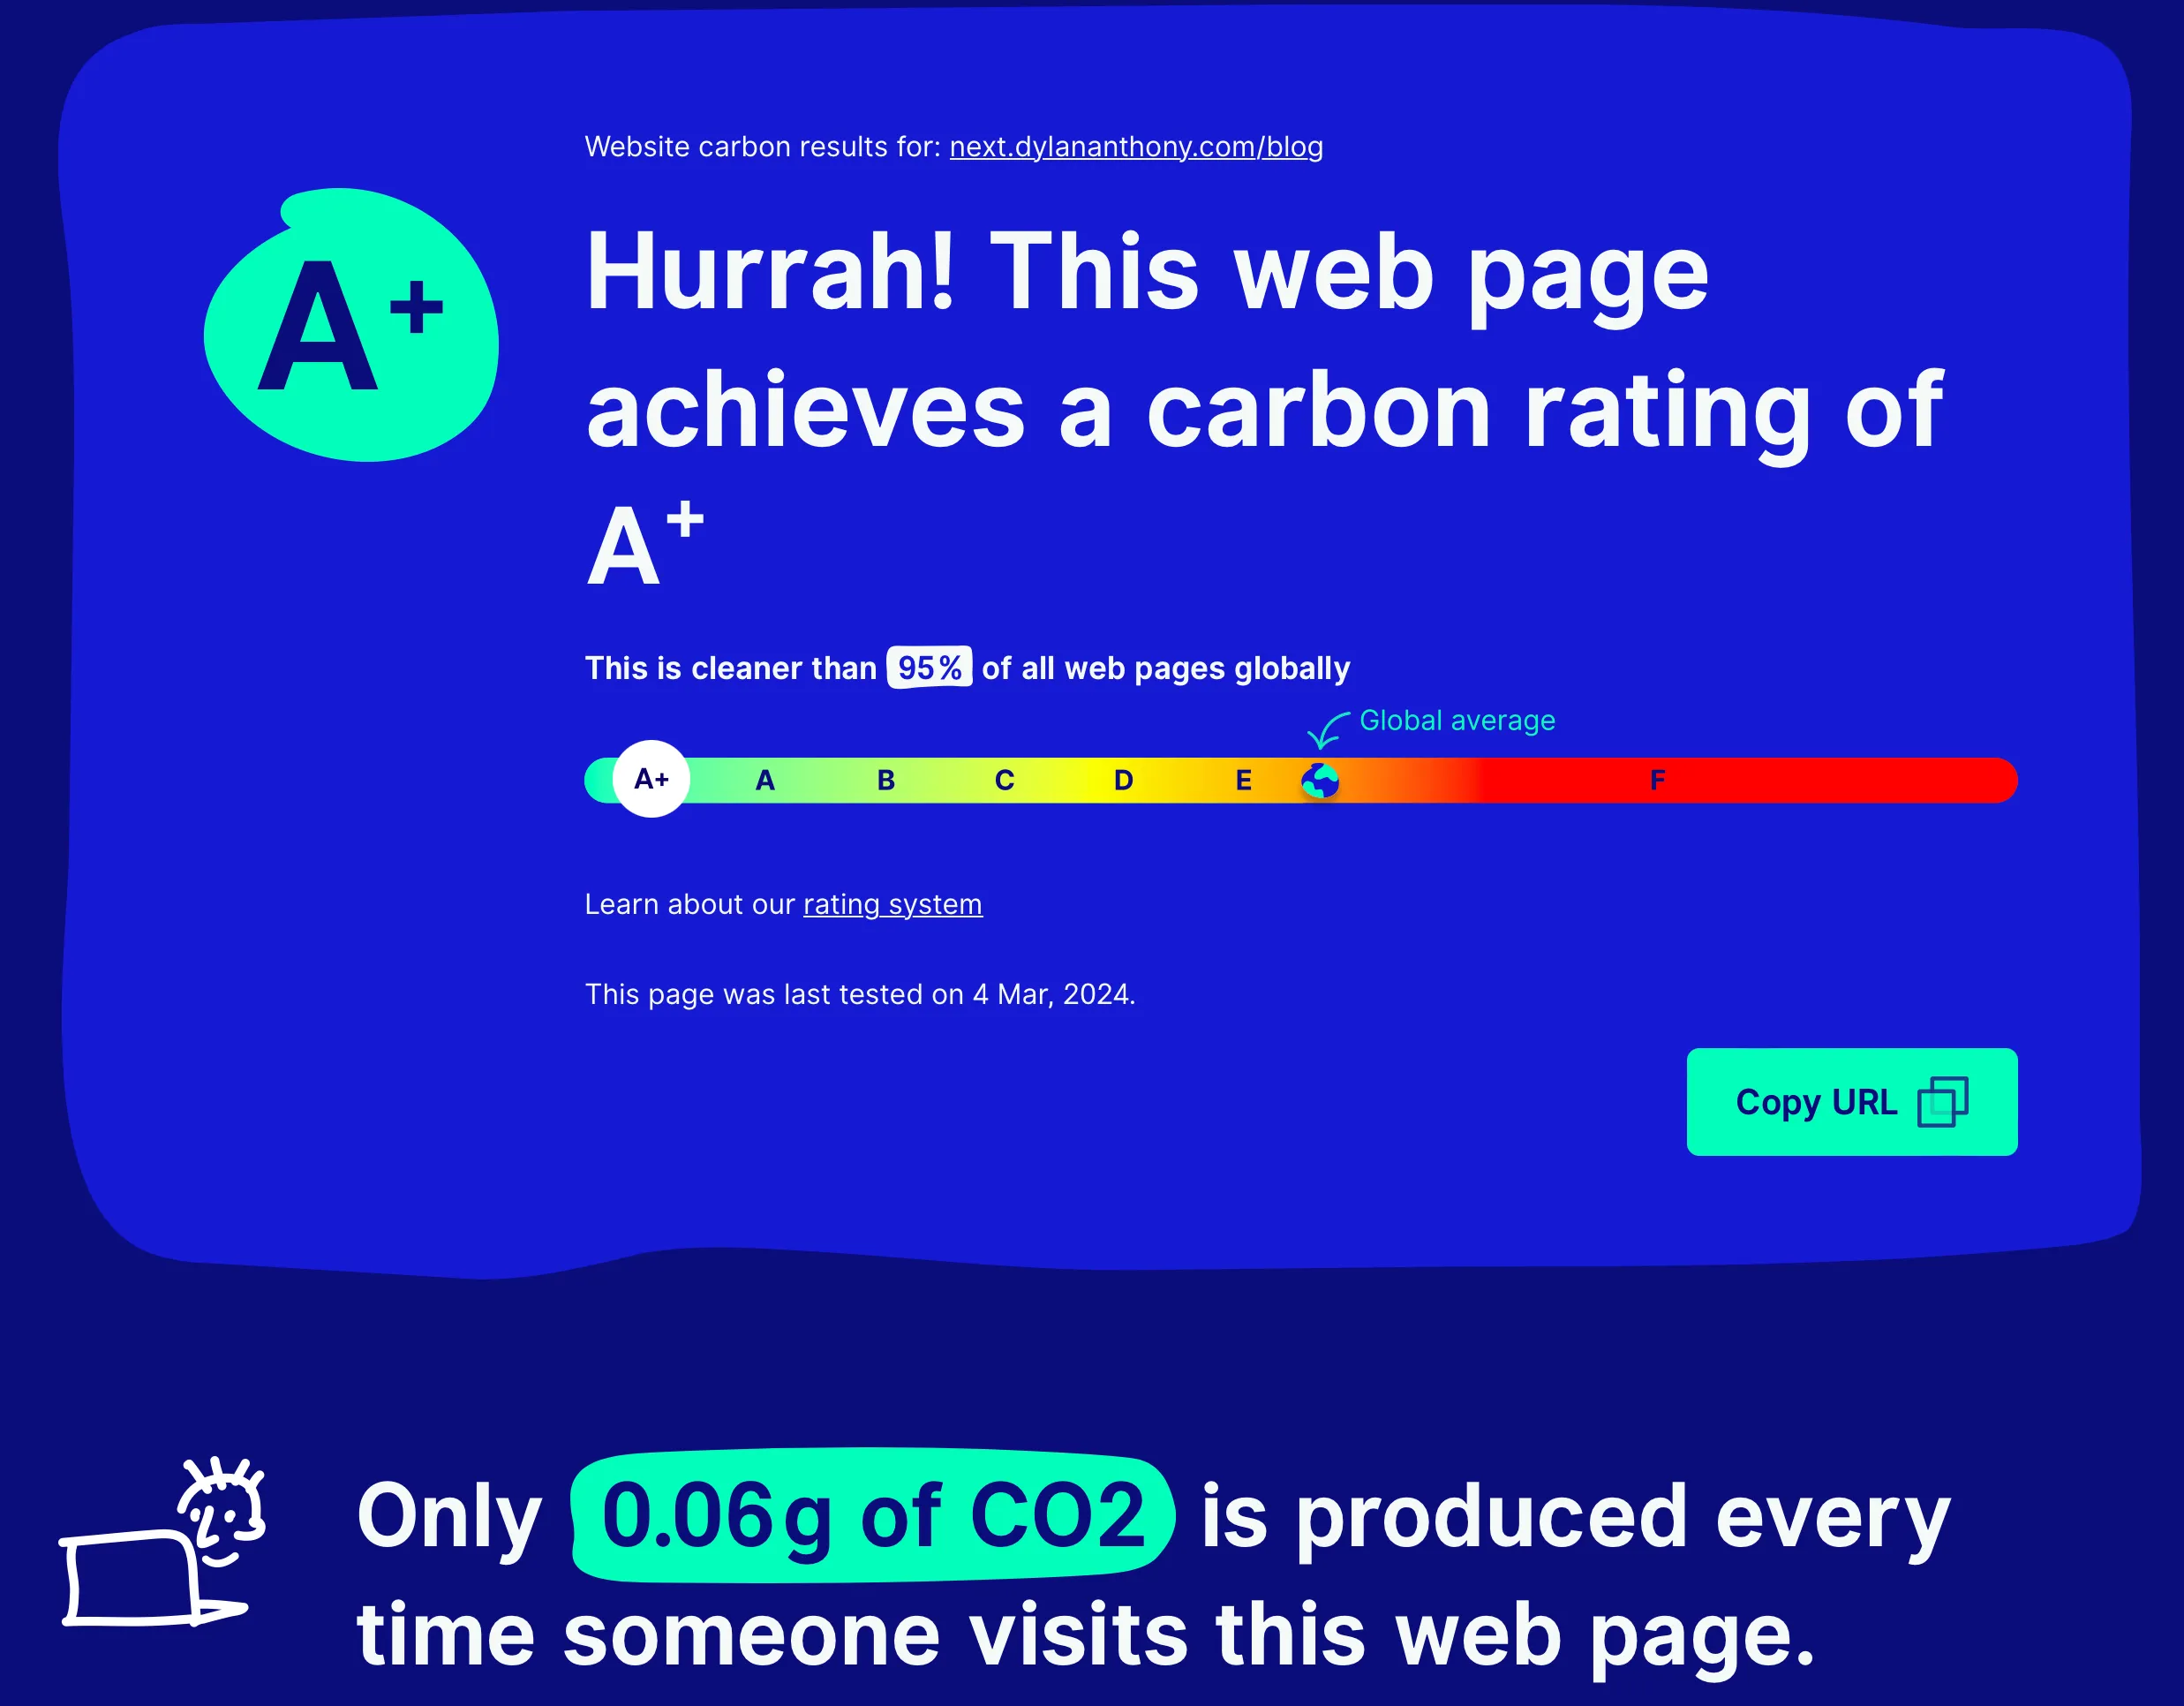 
Another screenshot of websitecarbon.com, this time my website gets an A+.
This is cleaner than 95% of other websites.
Below the scale, the website states "Only 0.06g of CO2 is produced every time someone visits this webpage"
